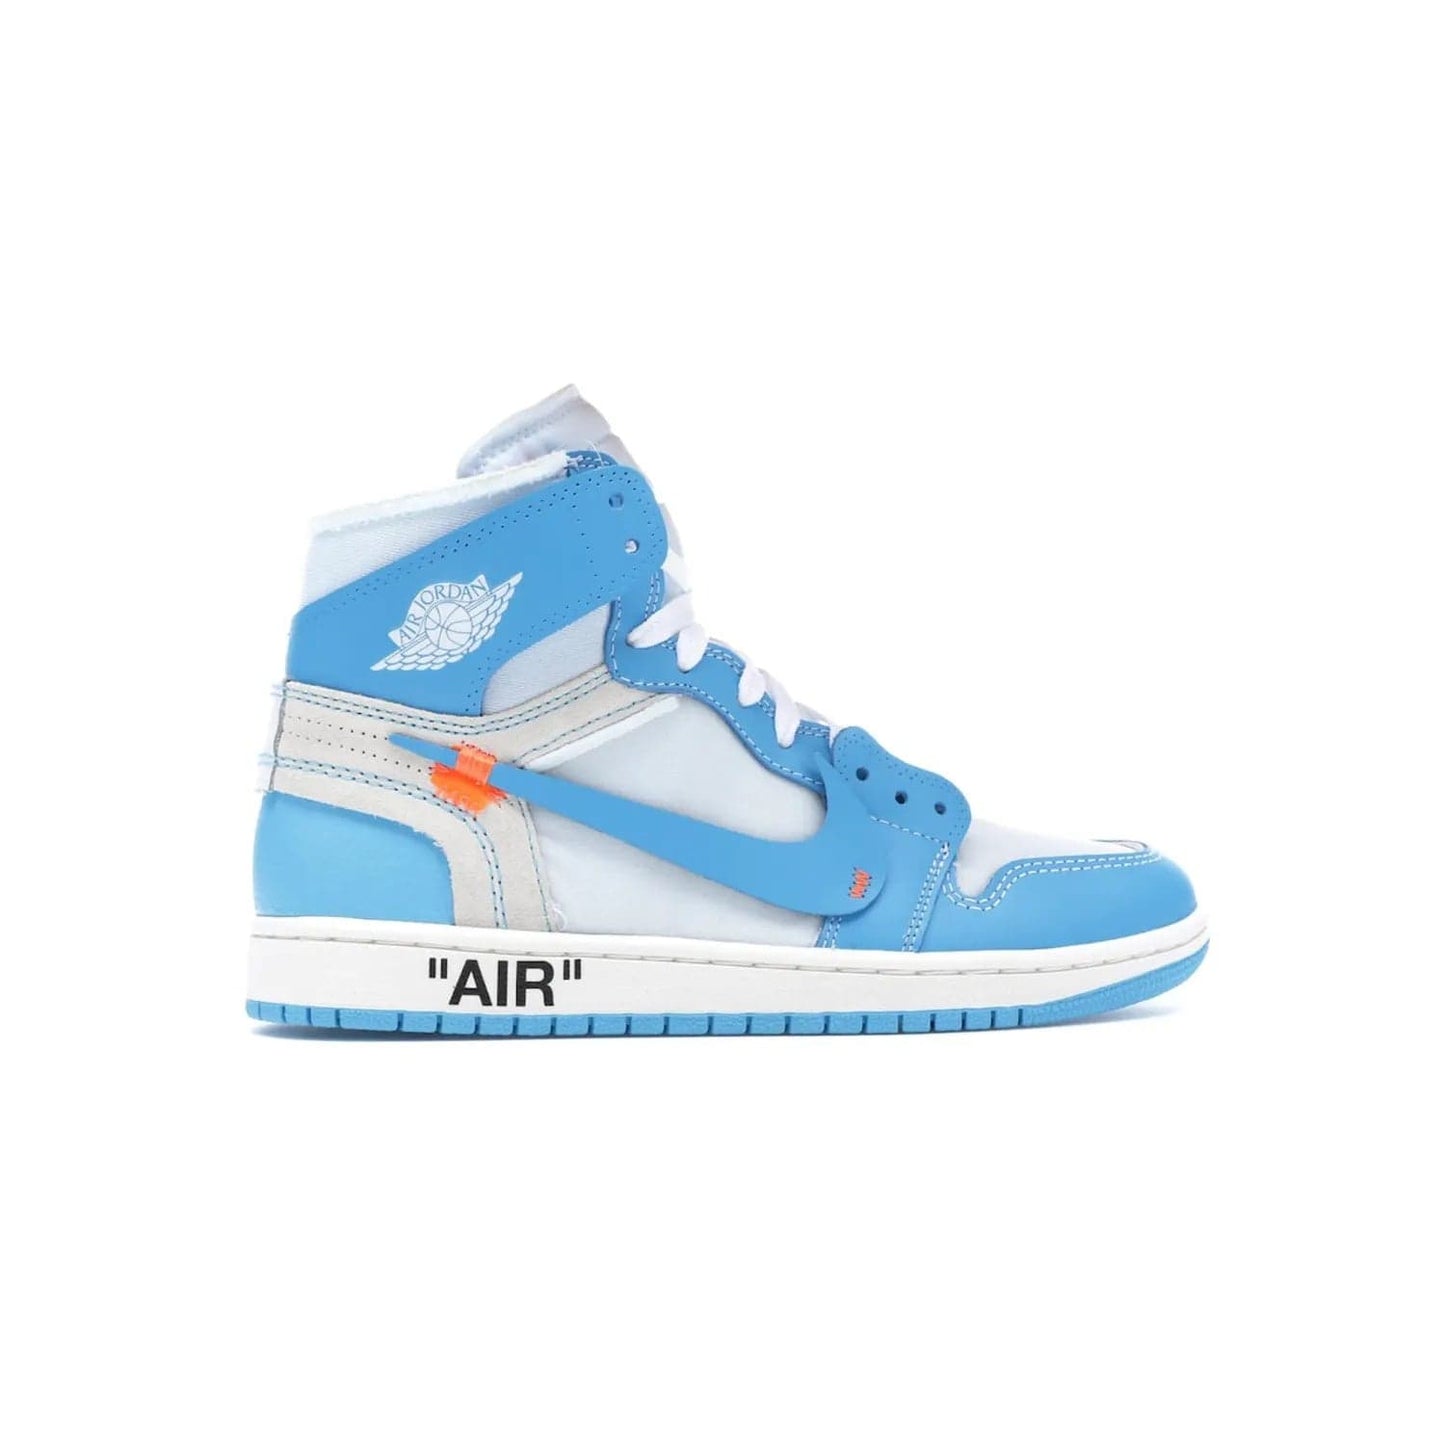 Jordan 1 Retro High Off-White University Blue - Image 36 - Only at www.BallersClubKickz.com - Classic Jordan 1 Retro High "Off-White UNC" sneakers meld style and comfort. Boasting deconstructed white and blue leather, Off-White detailing, and a white, dark powder blue and cone colorway, these sneakers are perfect for dressing up or down. Get the iconic Off-White Jordan 1's and upgrade your look.